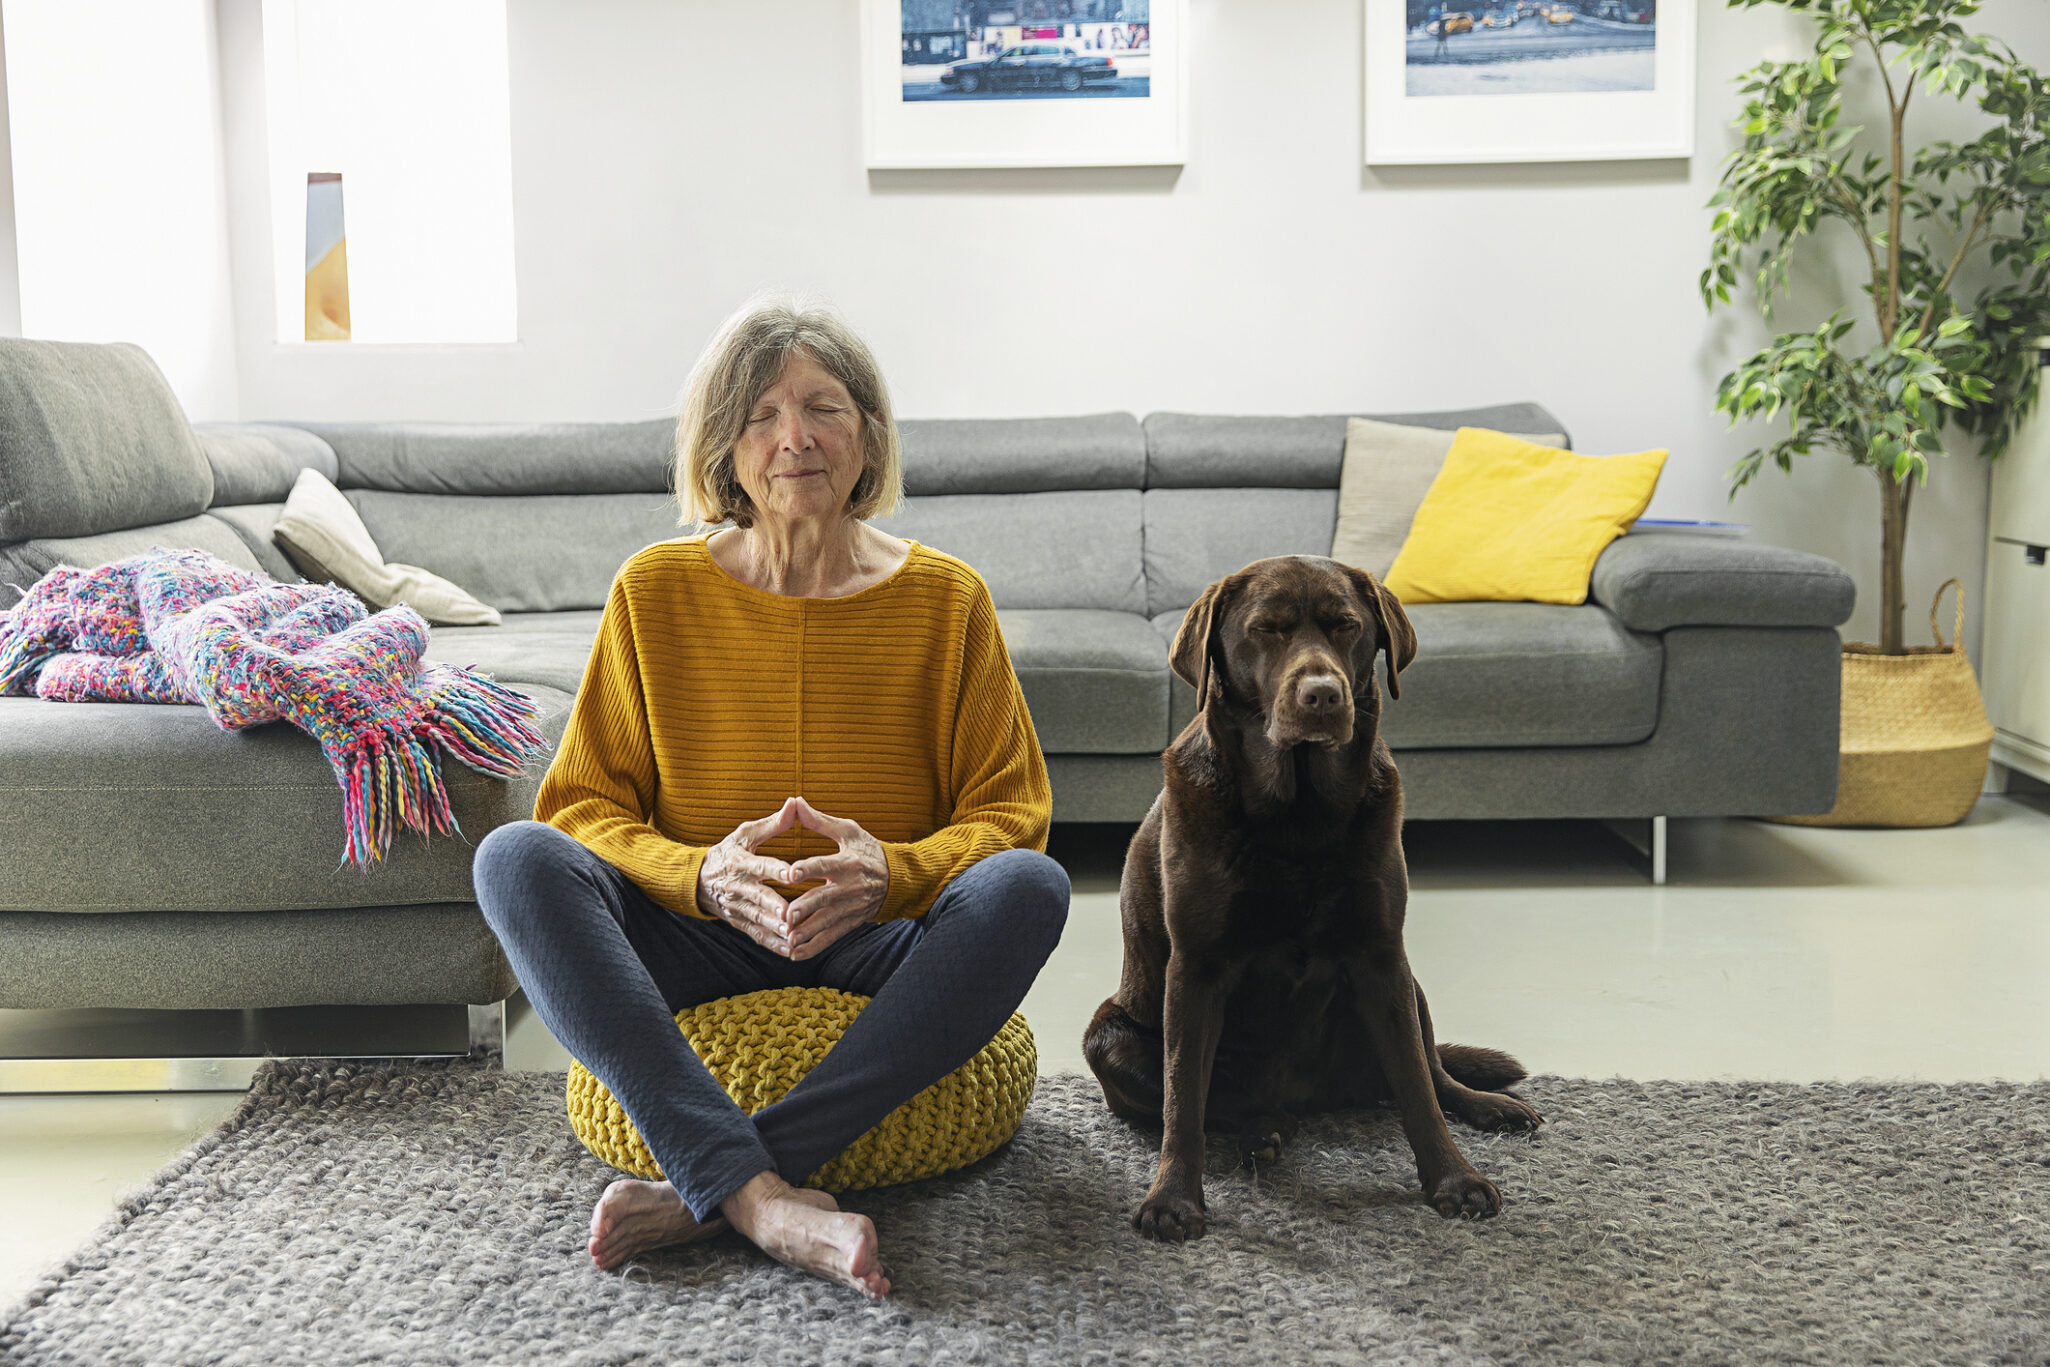 A woman and her dog meditating on a rug in front of a couch